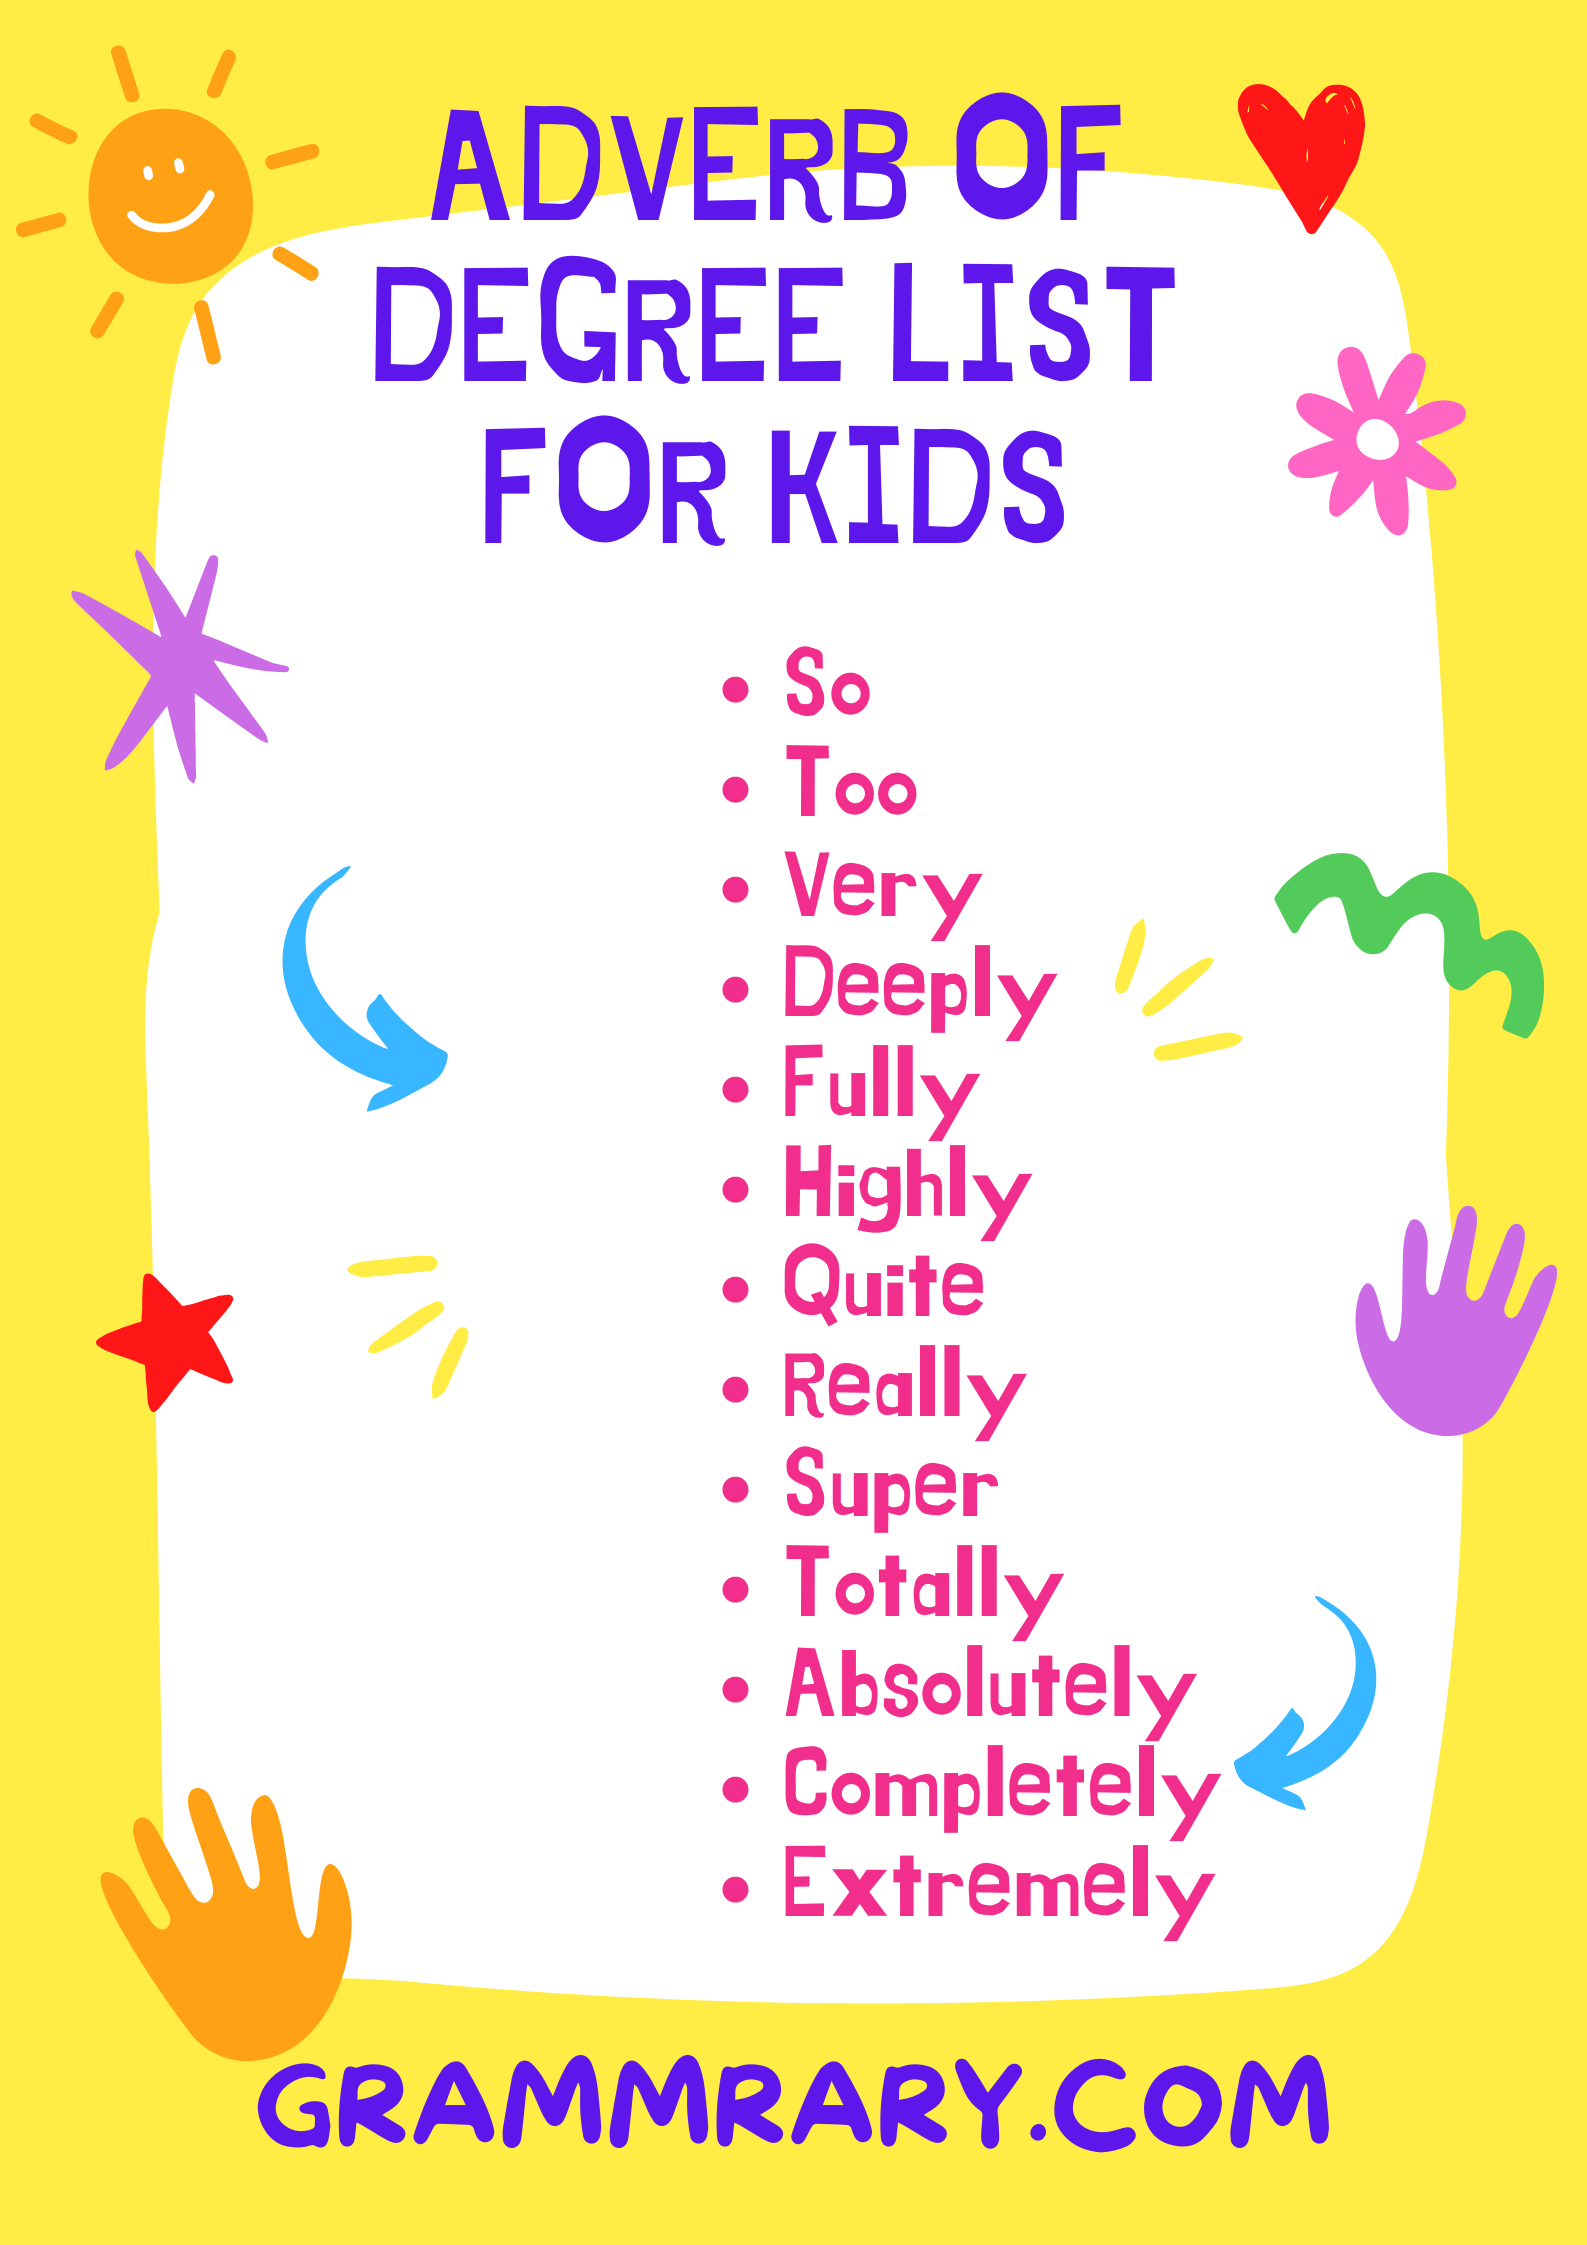 List of Adverb of Degree for Kids